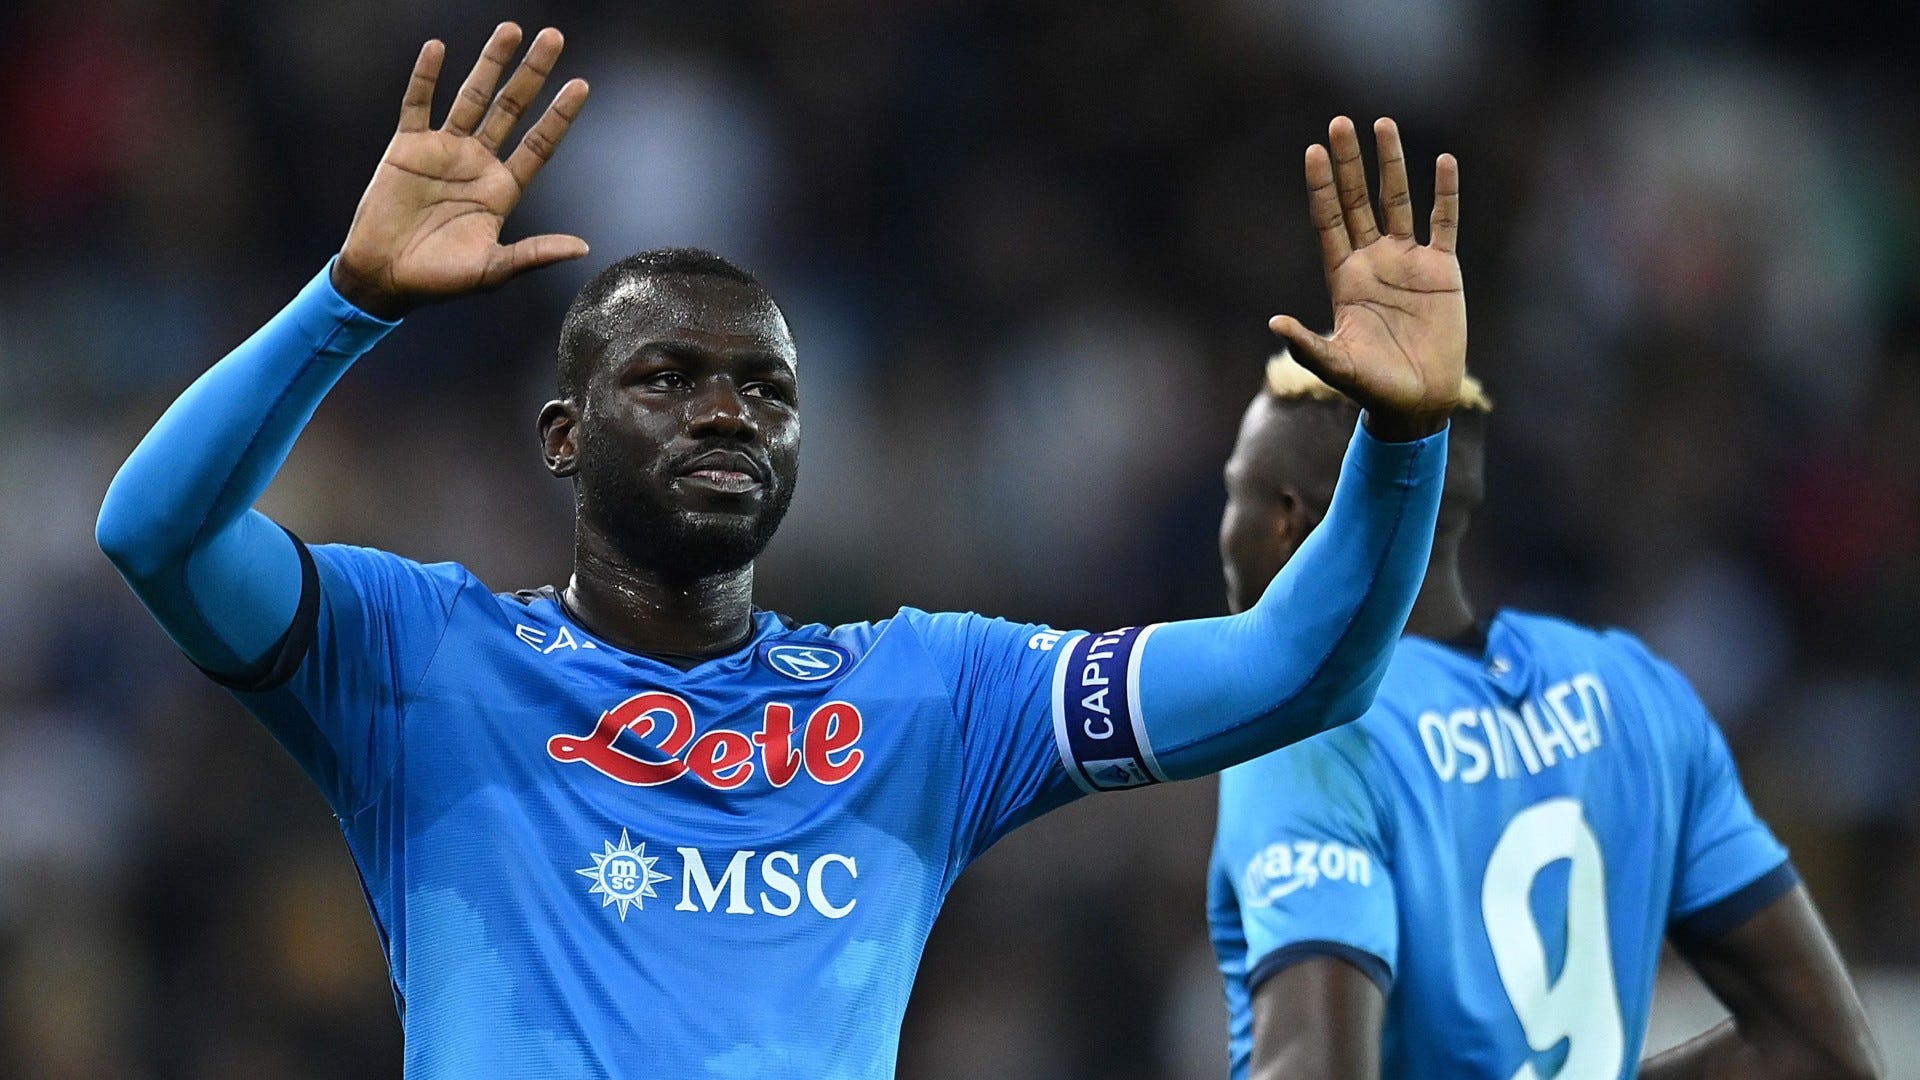 Napoli's Koulibaly not for sale and 'I will chain myself if he was sold' - Spalletti | Goal.com Singapore